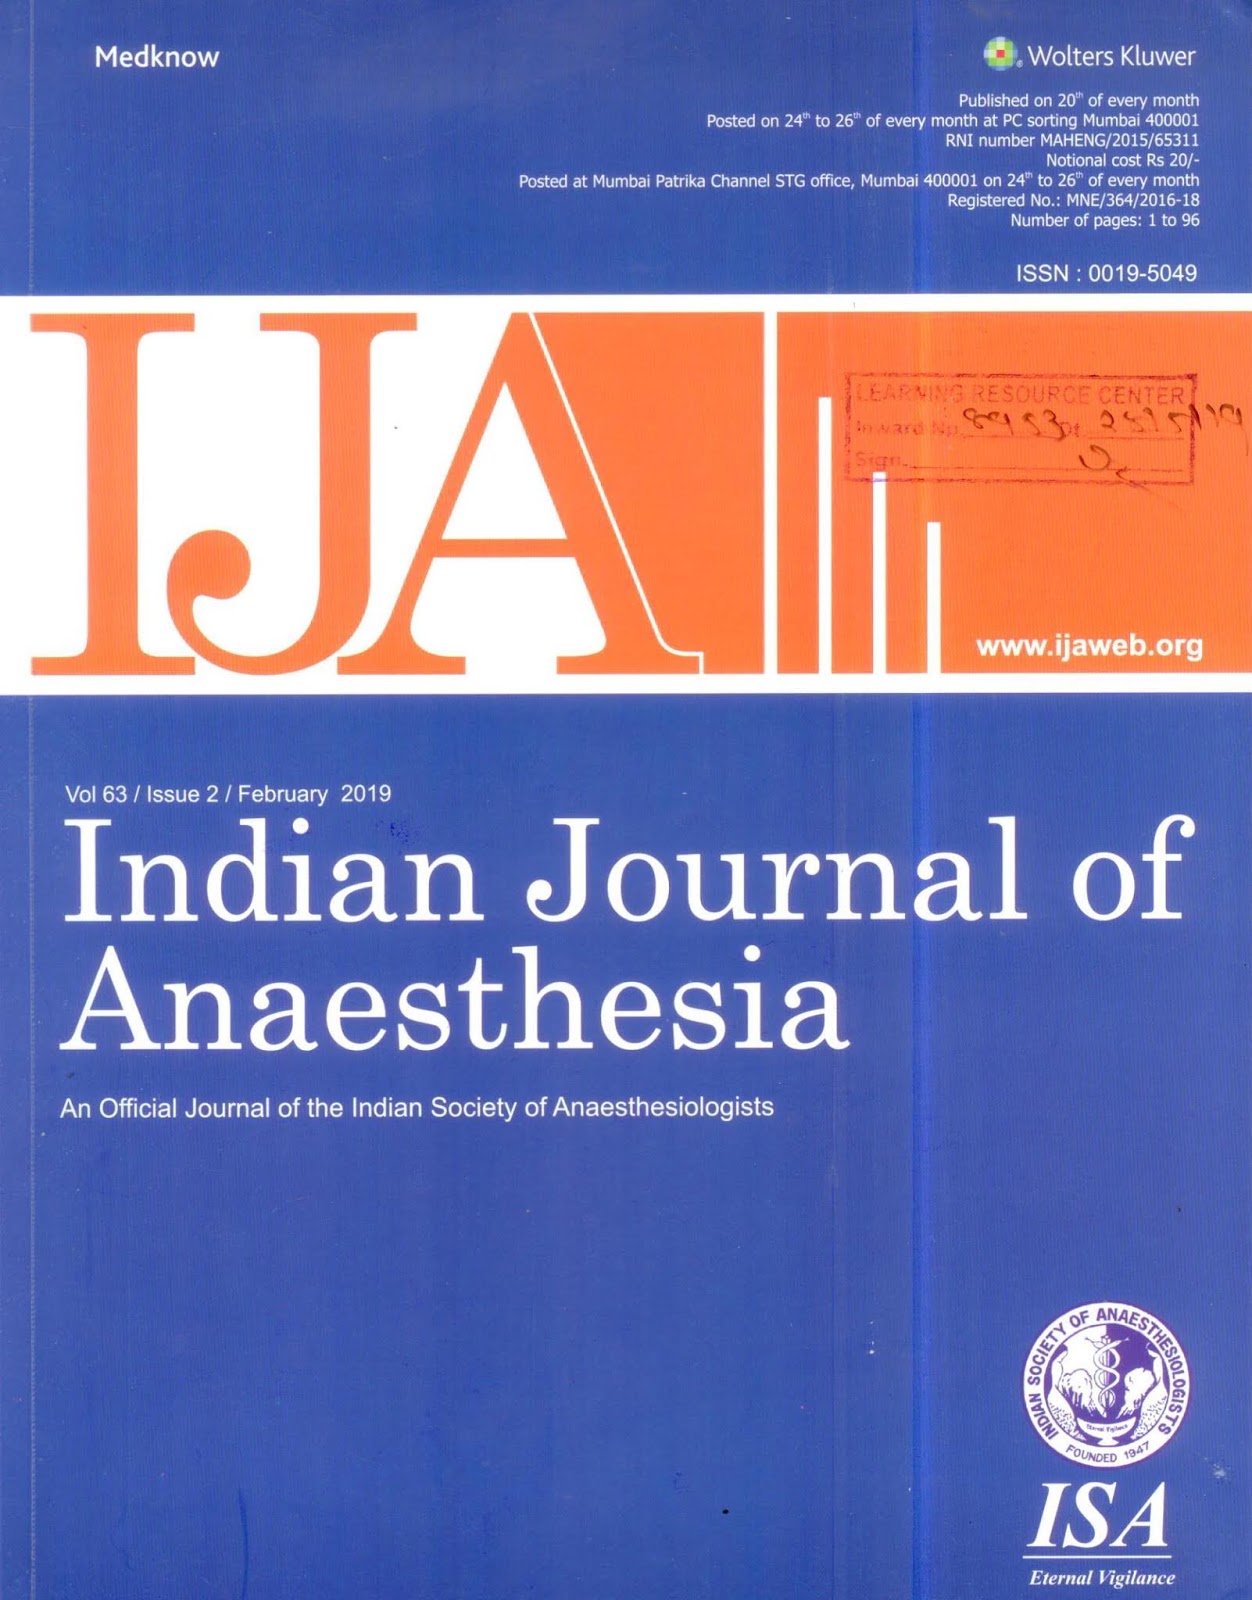 http://www.ijaweb.org/showBackIssue.asp?issn=0019-5049;year=2019;volume=63;issue=2;month=February